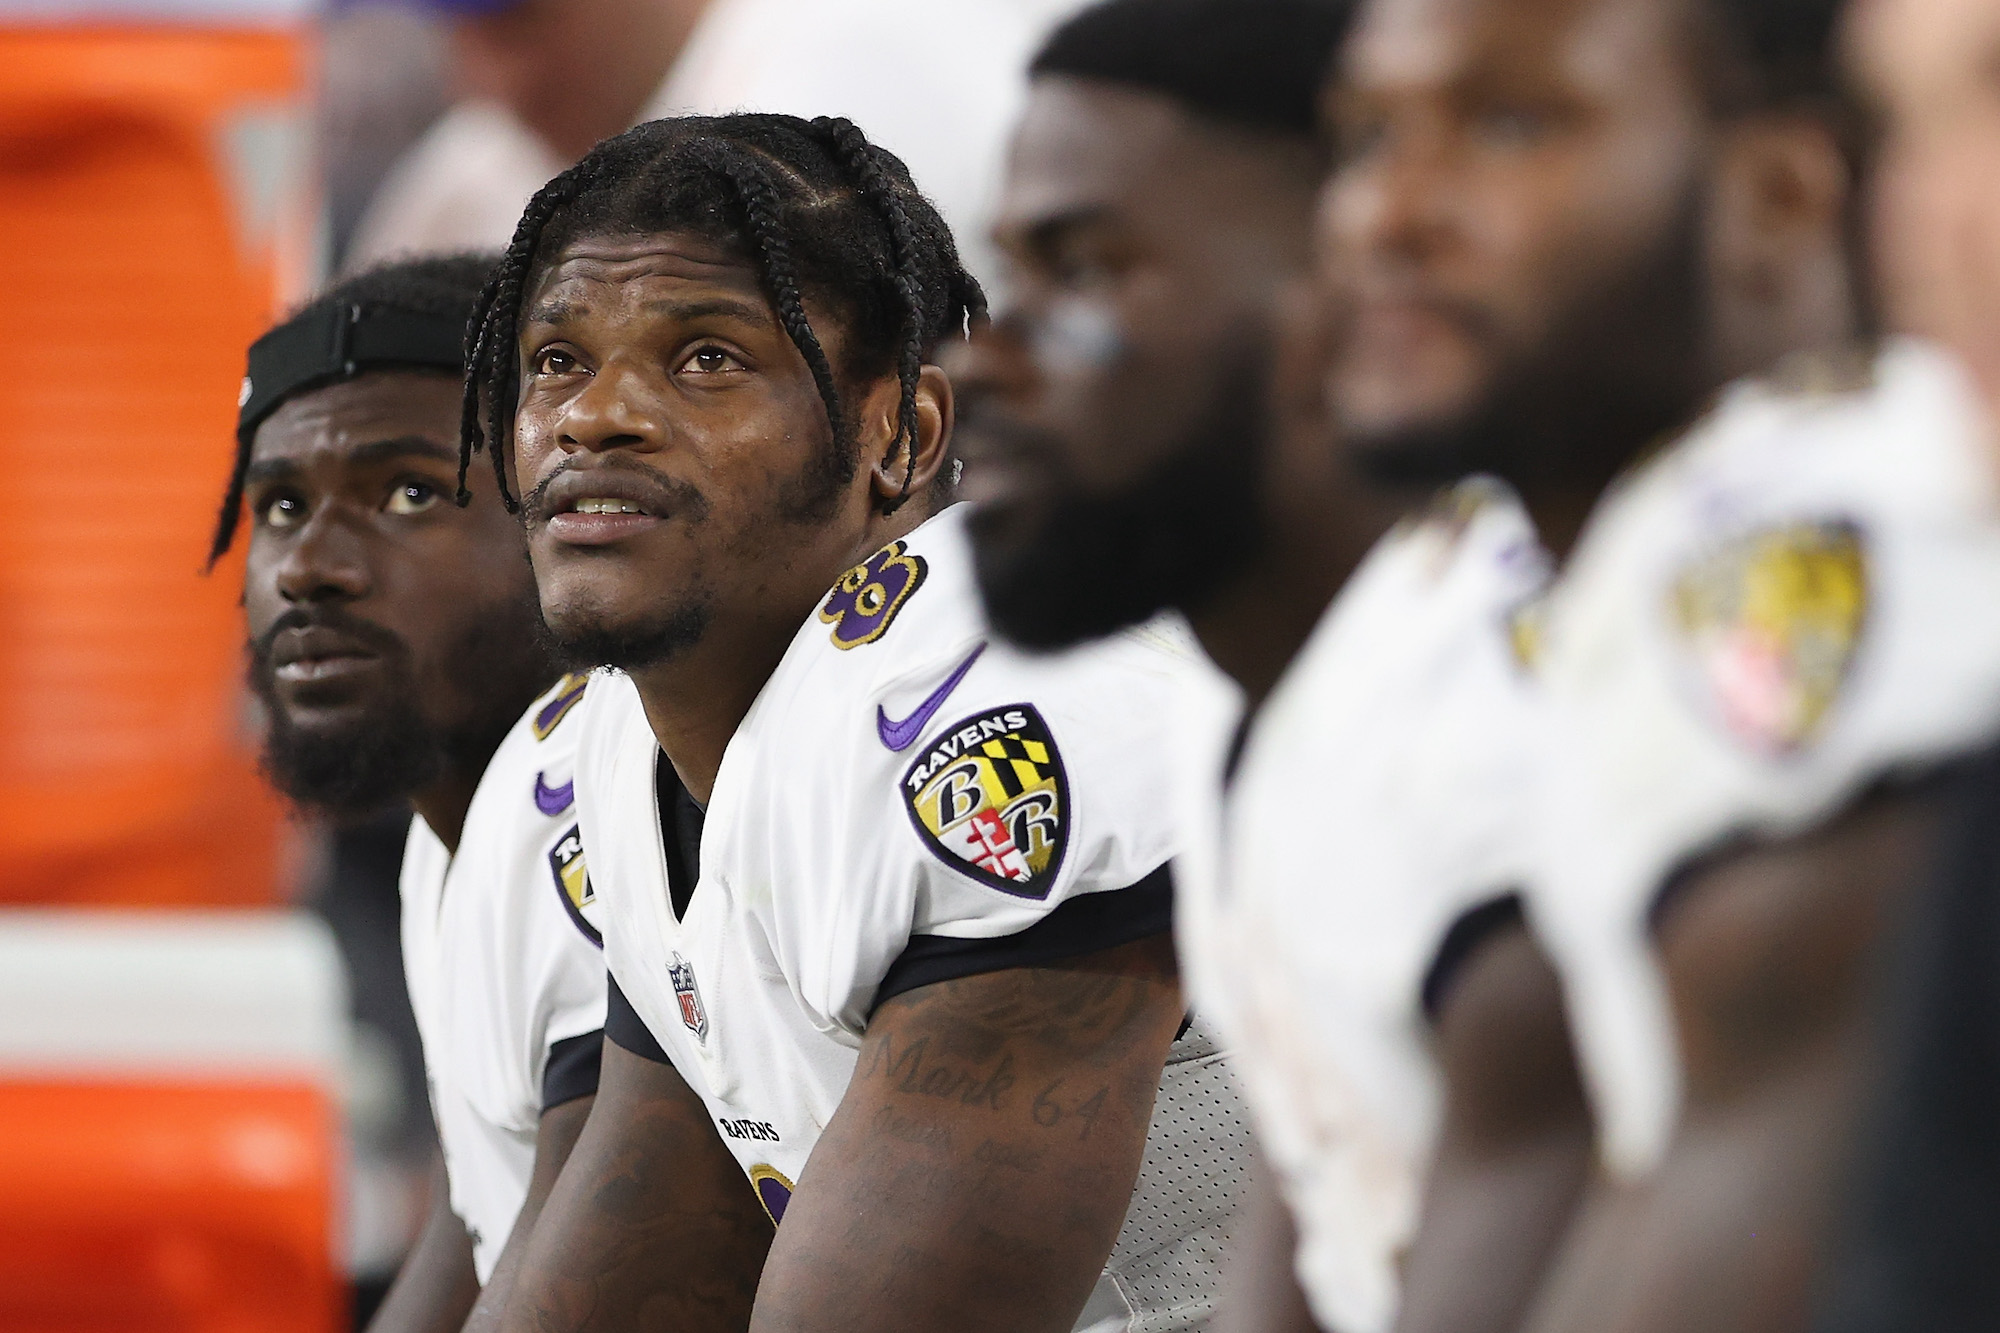 LAS VEGAS, NEVADA - SEPTEMBER 13: Quarterback Lamar Jackson #8 of the Baltimore Ravens watches from the bench during the NFL game against the Las Vegas Raiders at Allegiant Stadium on September 13, 2021 in Las Vegas, Nevada. The Raiders defeated the Ravens 33-27 in overtime. (Photo by Christian Petersen/Getty Images)